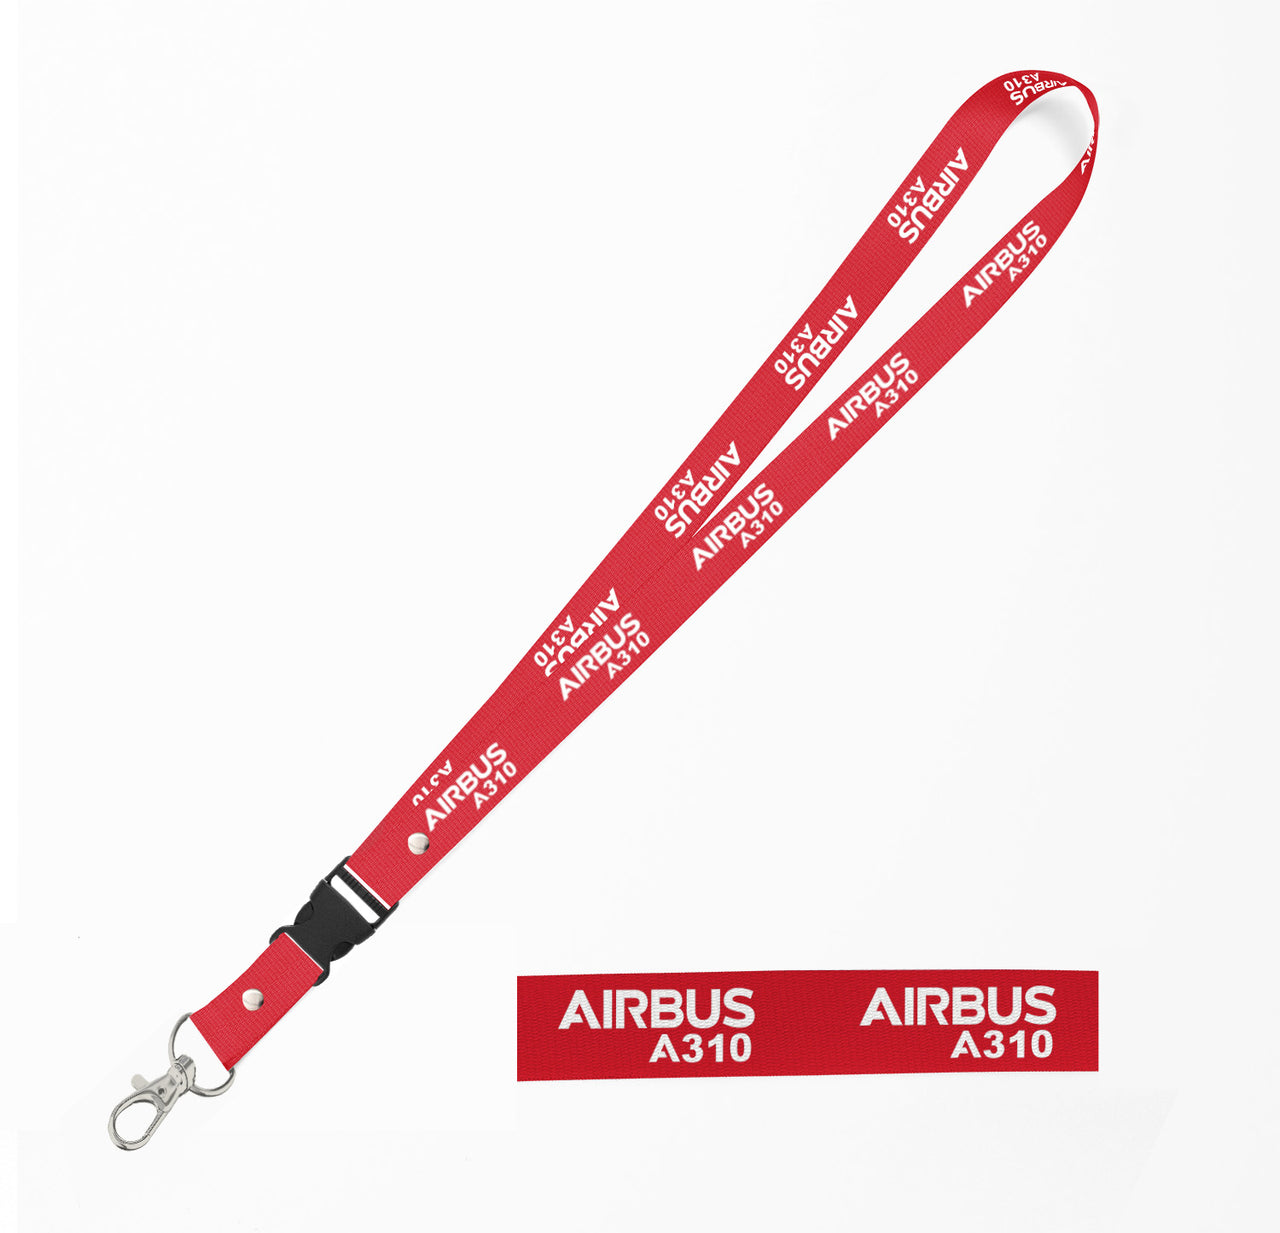 Airbus A310 & Text Designed Detachable Lanyard & ID Holders